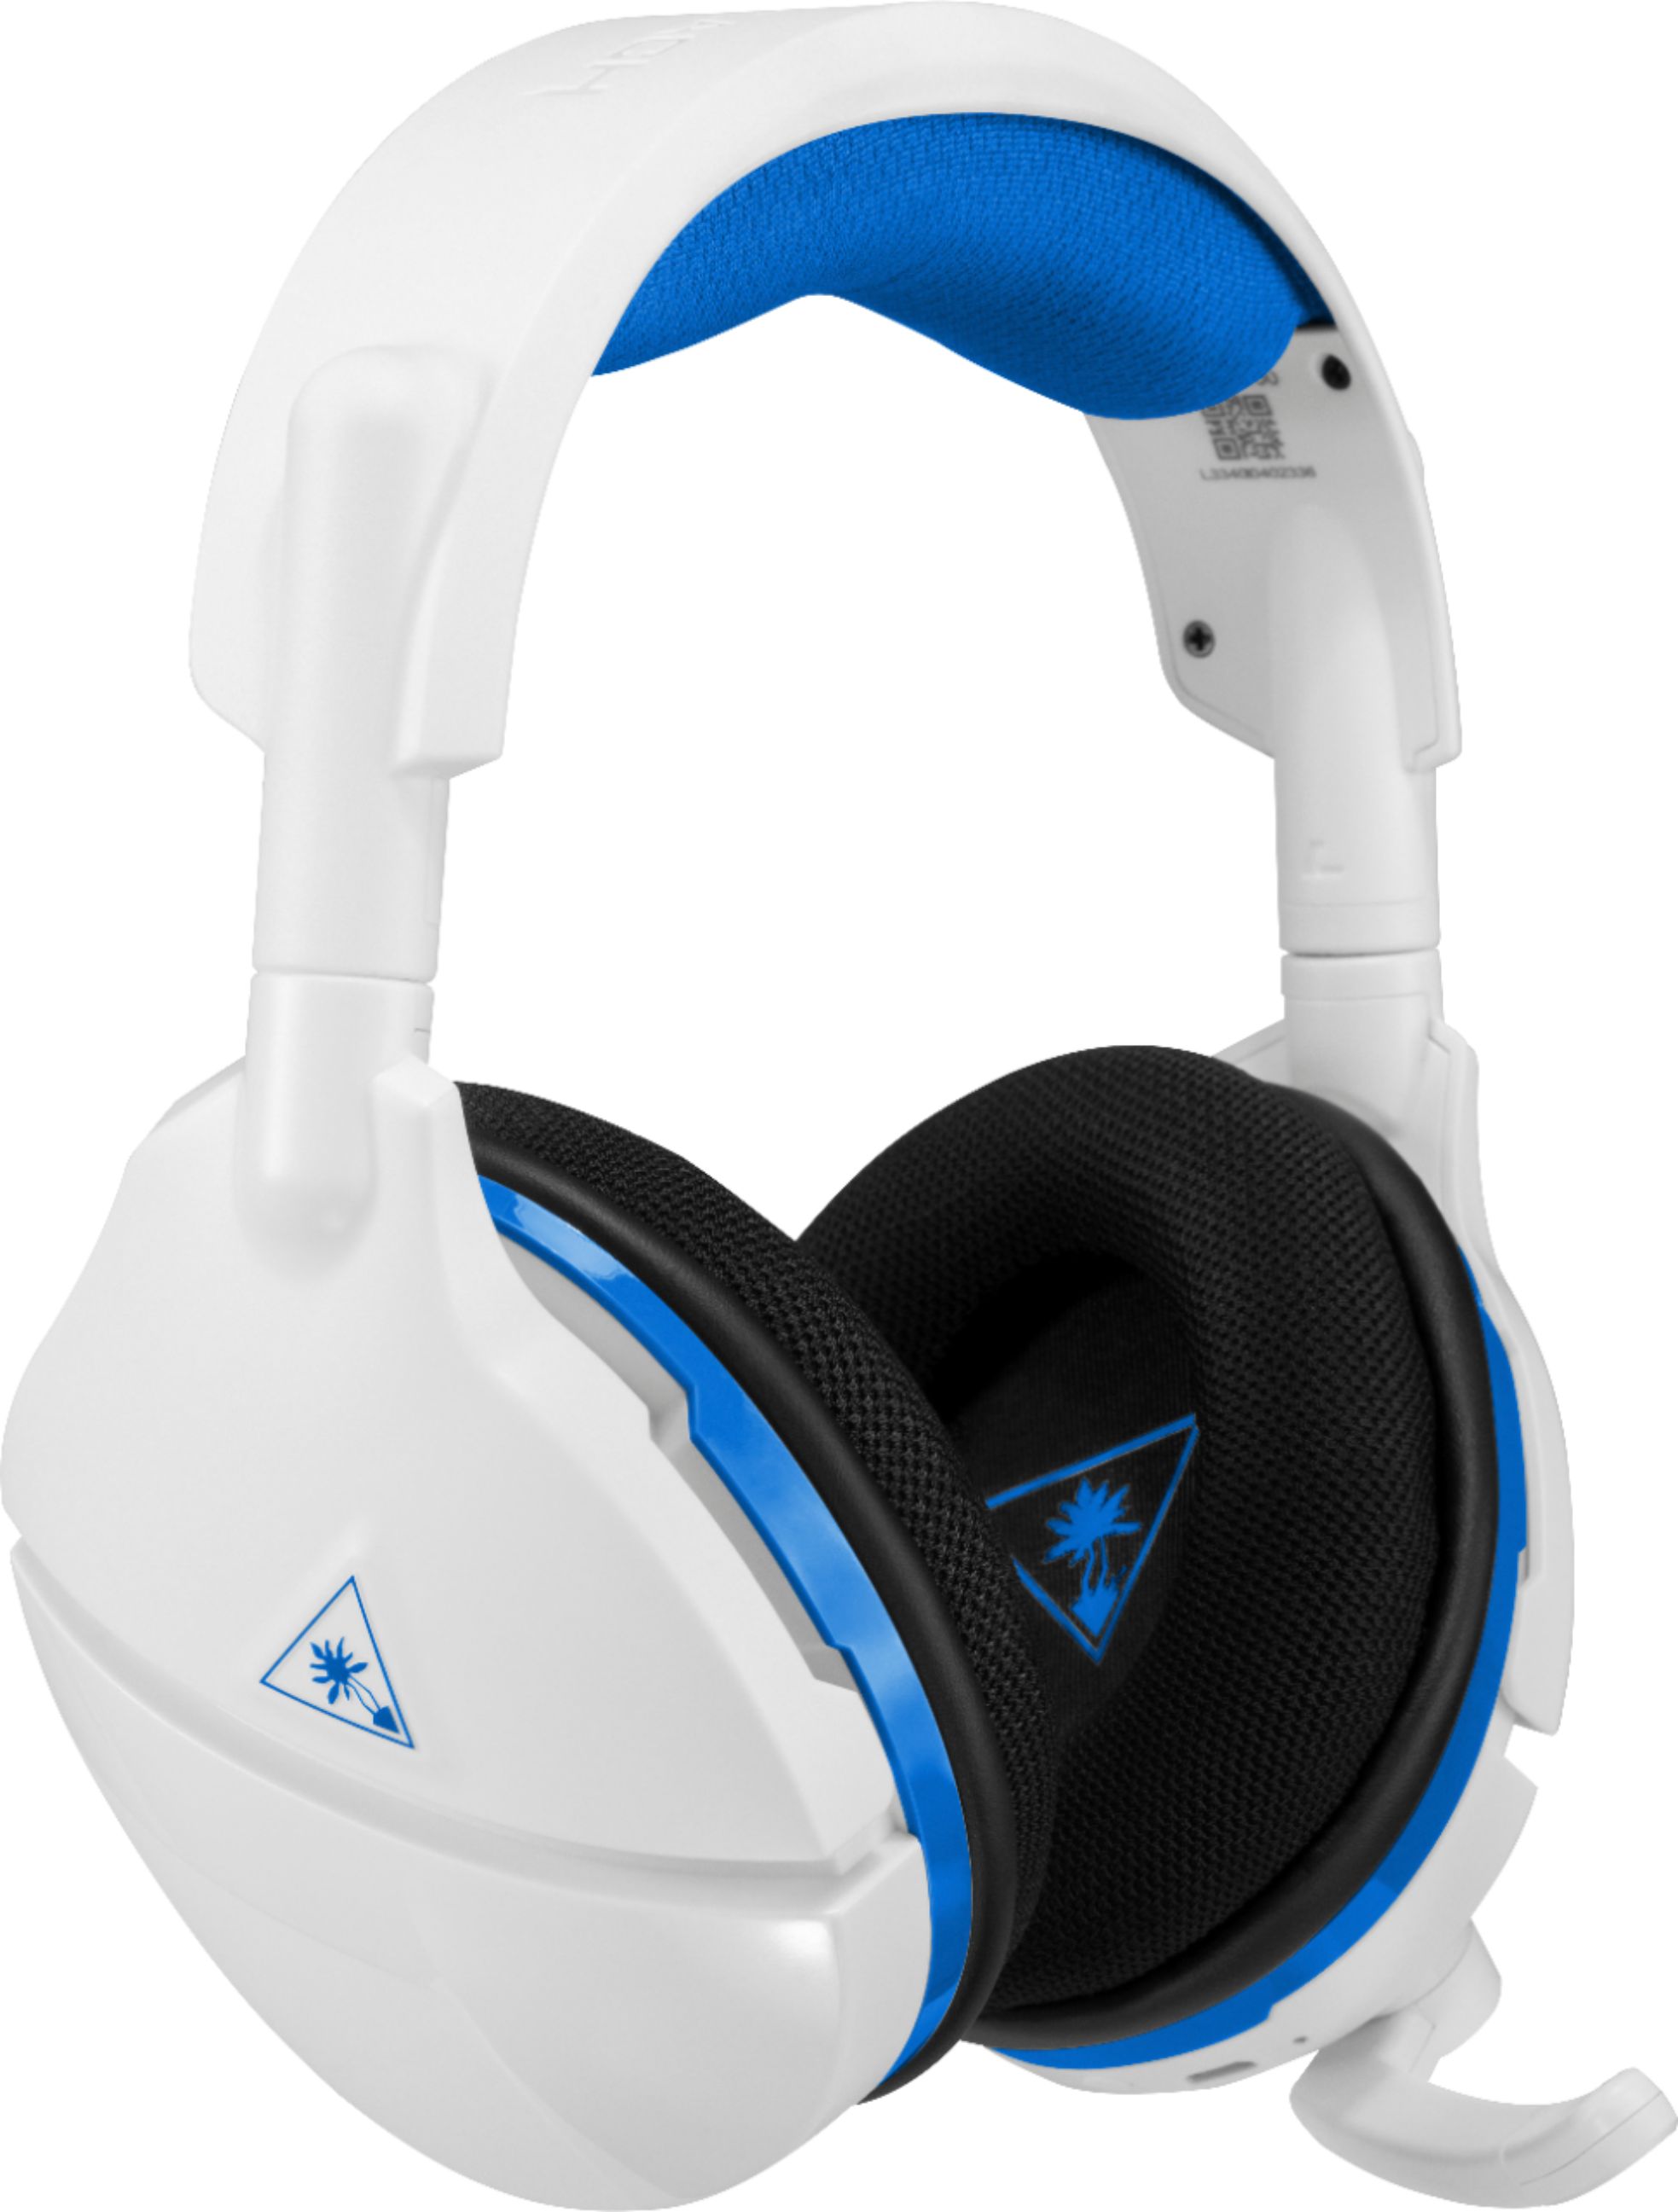 Turtle Beach - Stealth 600 Wireless Surround Sound Gaming Headset for PlayStation 4 and PlayStation 4 Pro - White